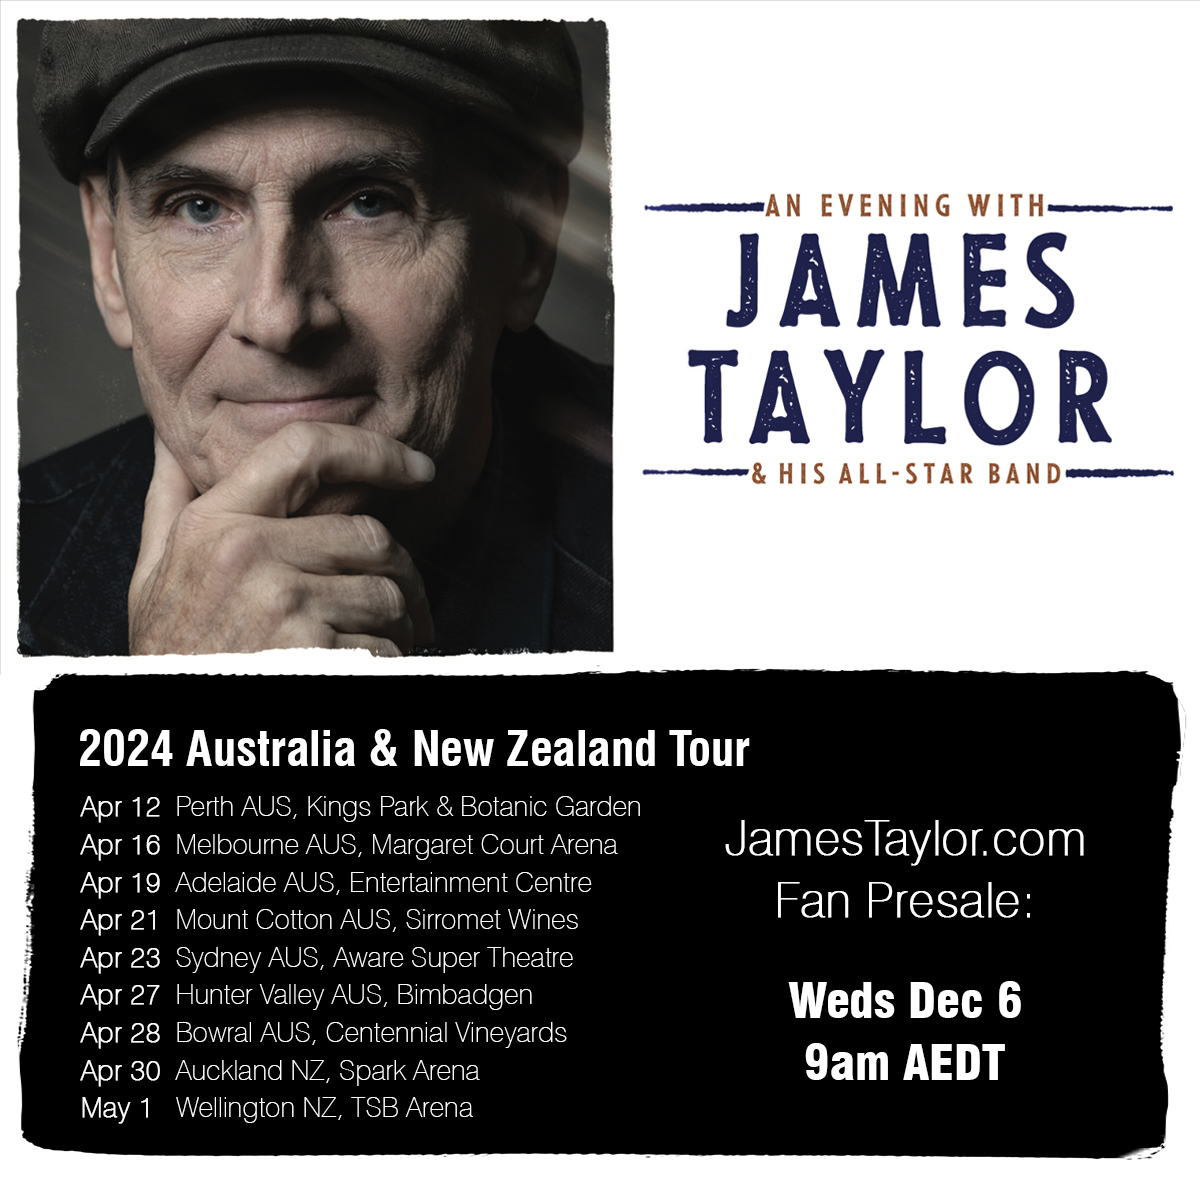 James Taylor Tour 2024: Get Your Tickets Now!